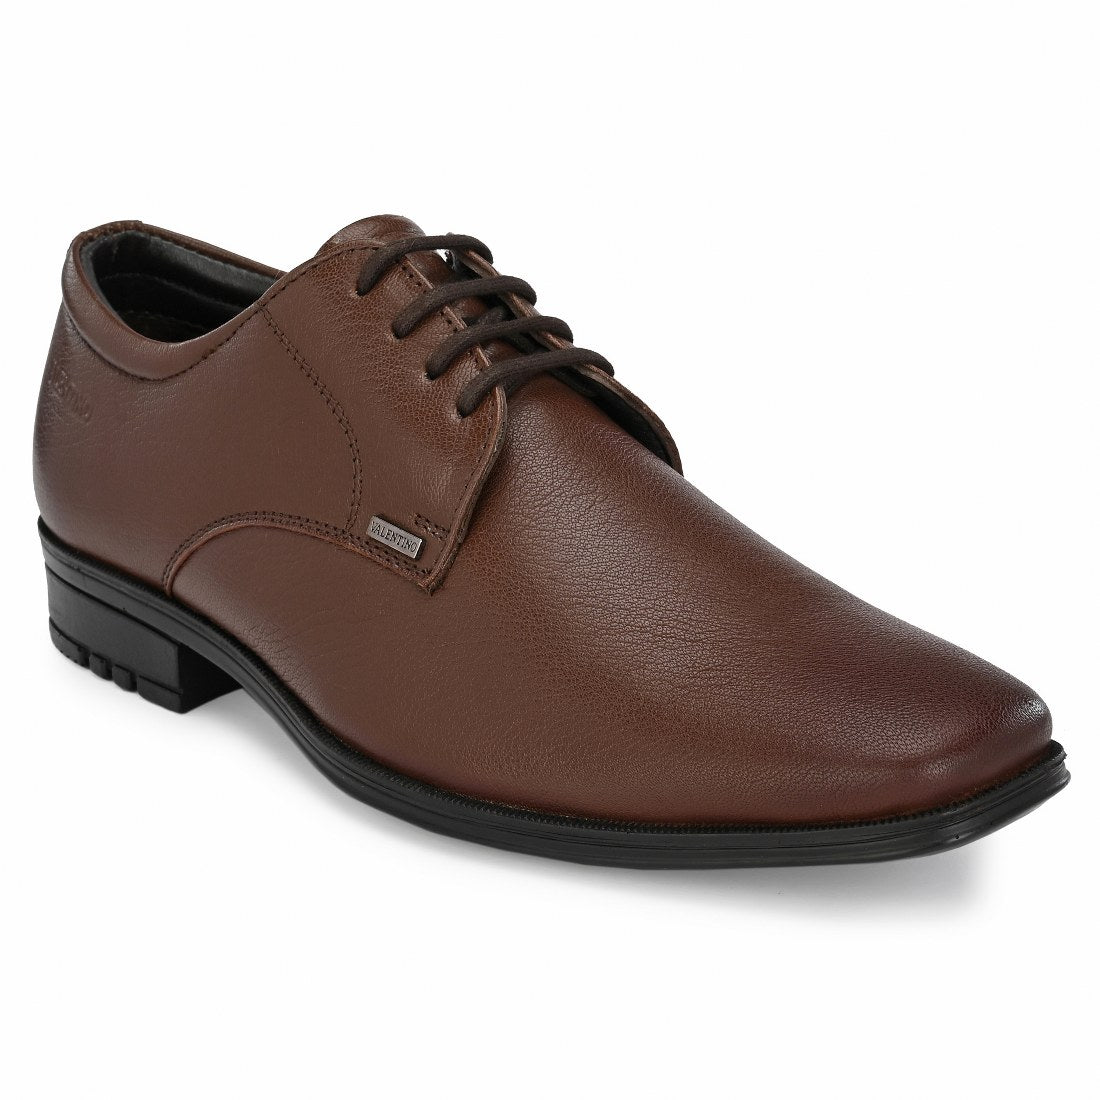 NEWTOP-55 MEN LEATHER TAN-MOCCA FORMAL LACE UP DERBY